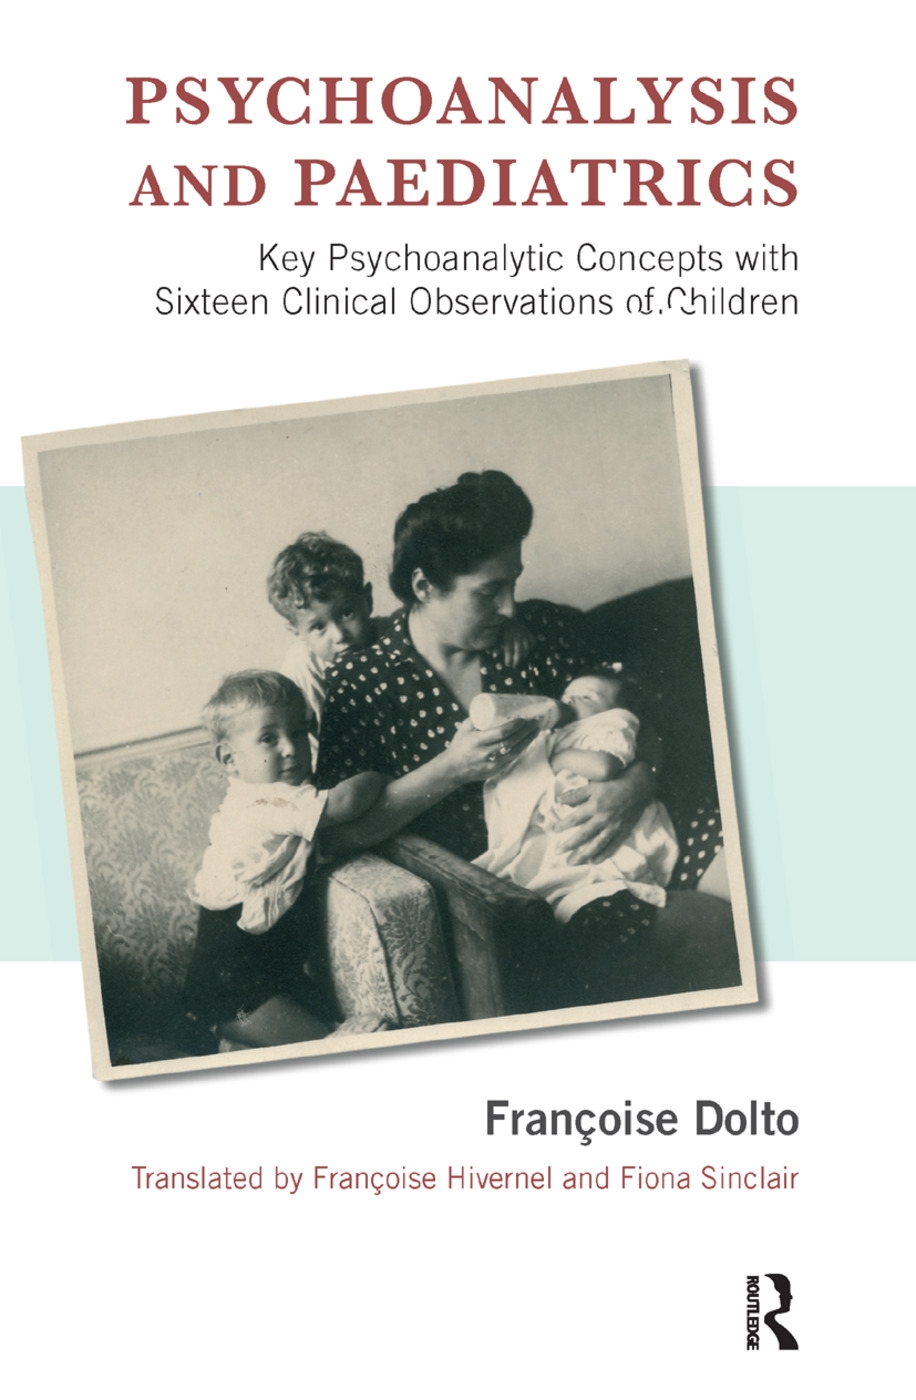 Psychoanalysis and Paediatrics: Key Psychoanalytic Concepts With Sixteen Clinical Obsevations of Children